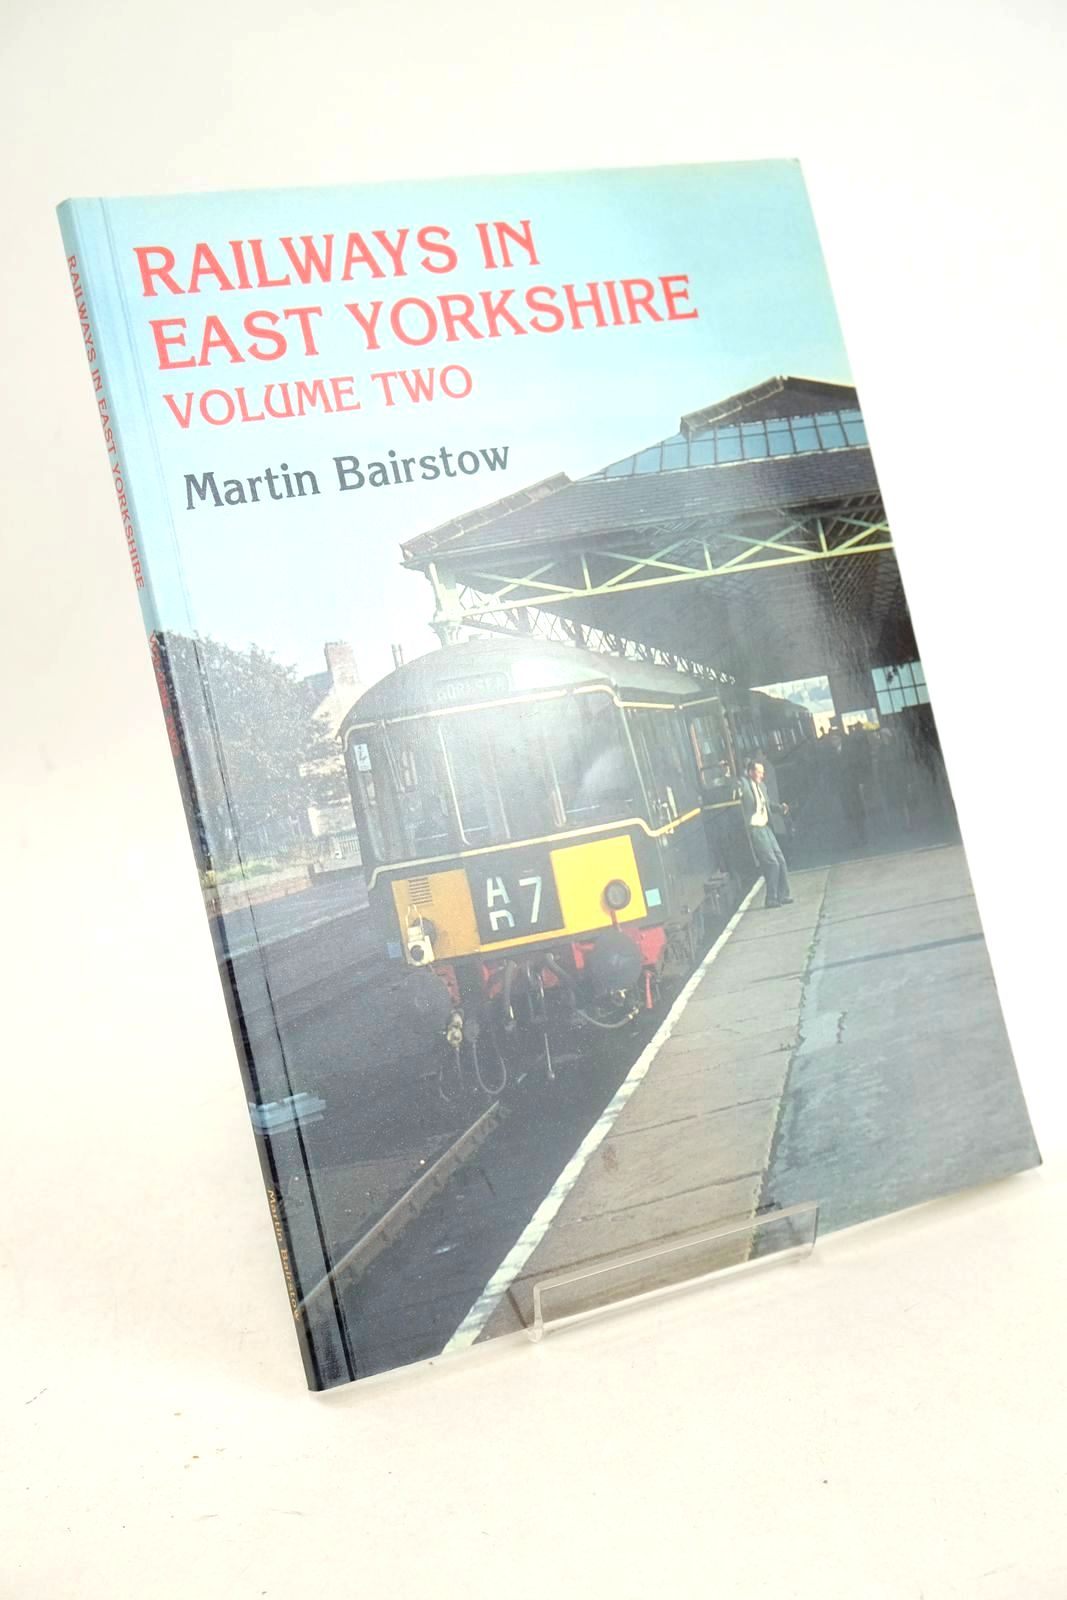 Photo of RAILWAYS IN EAST YORKSHIRE VOLUME TWO written by Bairstow, Martin published by Martin Bairstow (STOCK CODE: 1327069)  for sale by Stella & Rose's Books